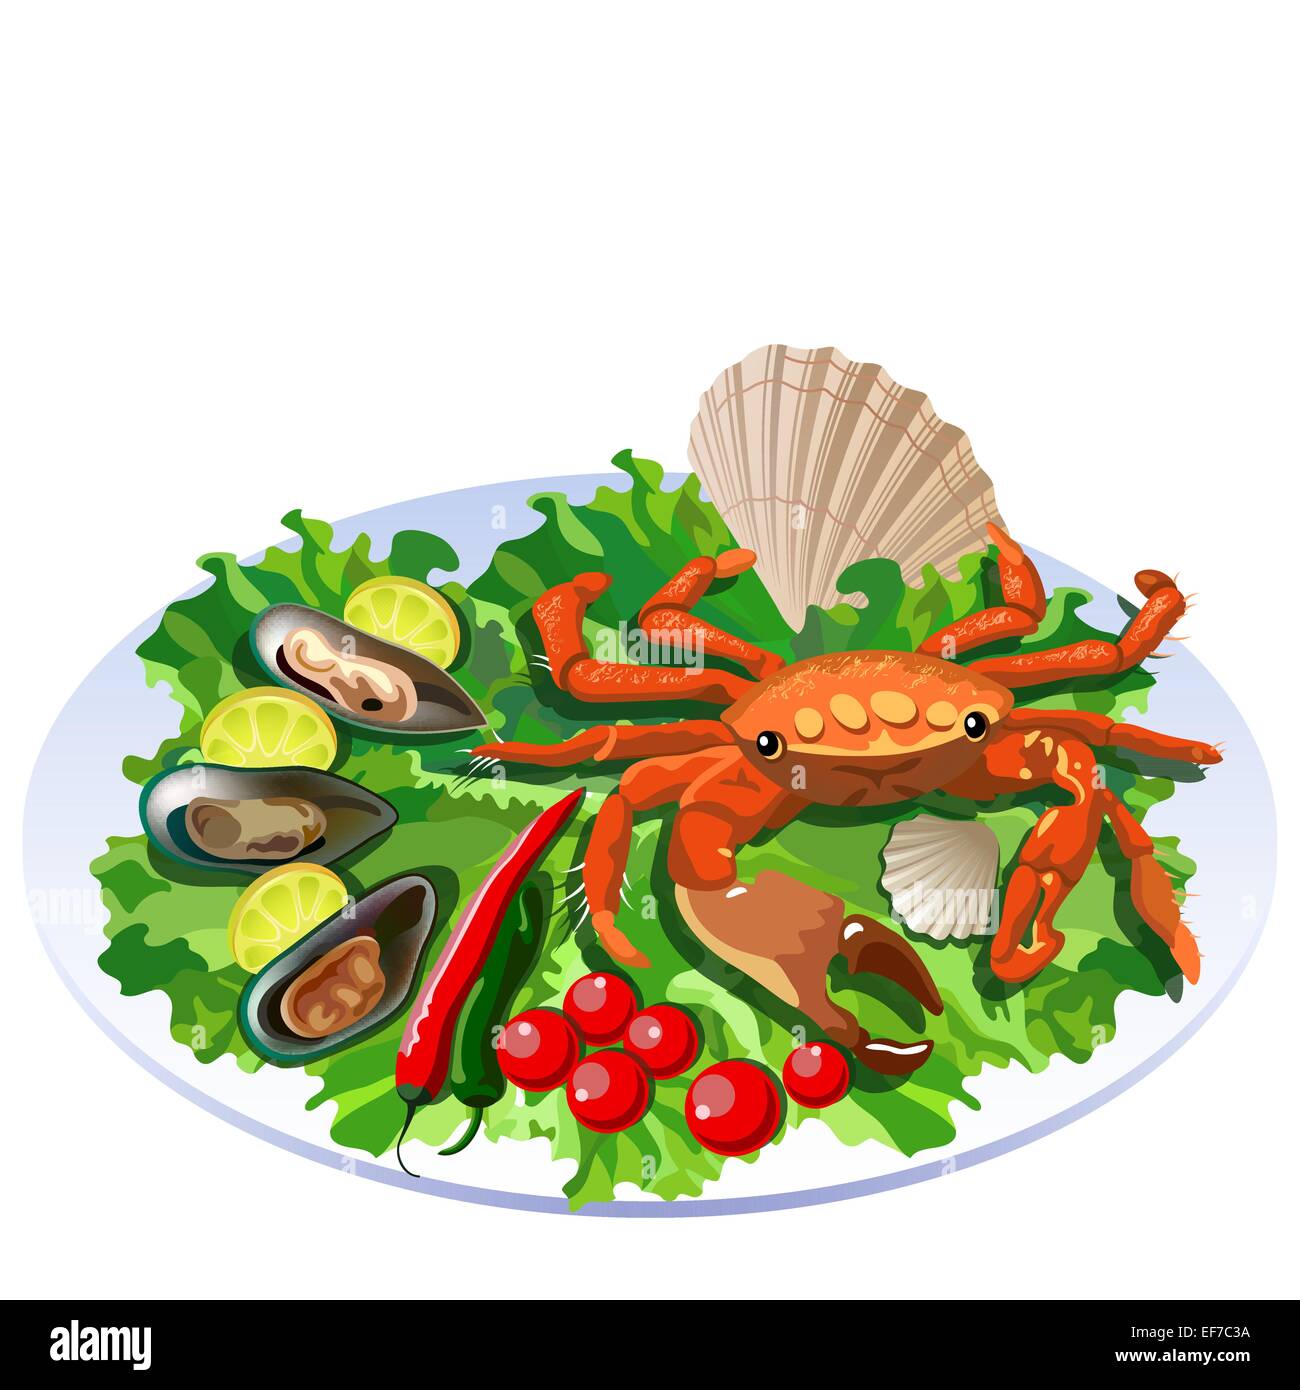 Crab in the dish with salad, tomatos and molluscs with lemon slices Stock Vector